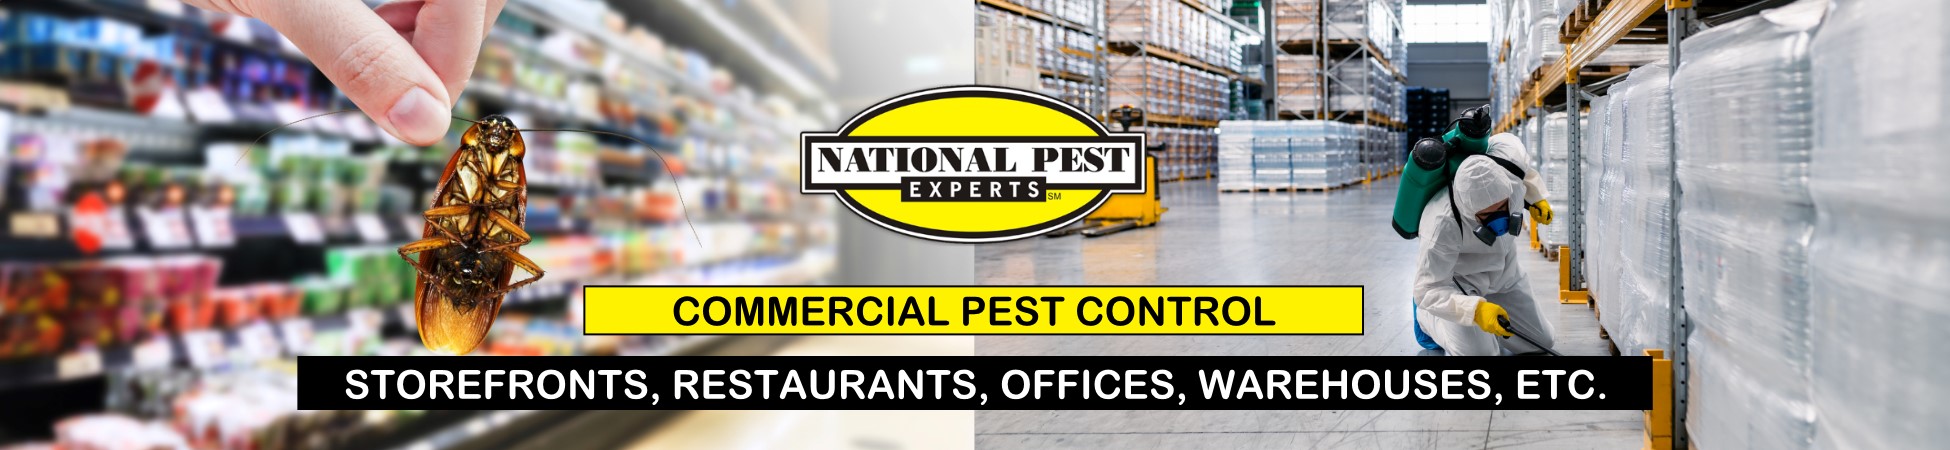 National Pest Experts - Commercial & Industrial exterminating and pest control in Laurel Hollow, NY